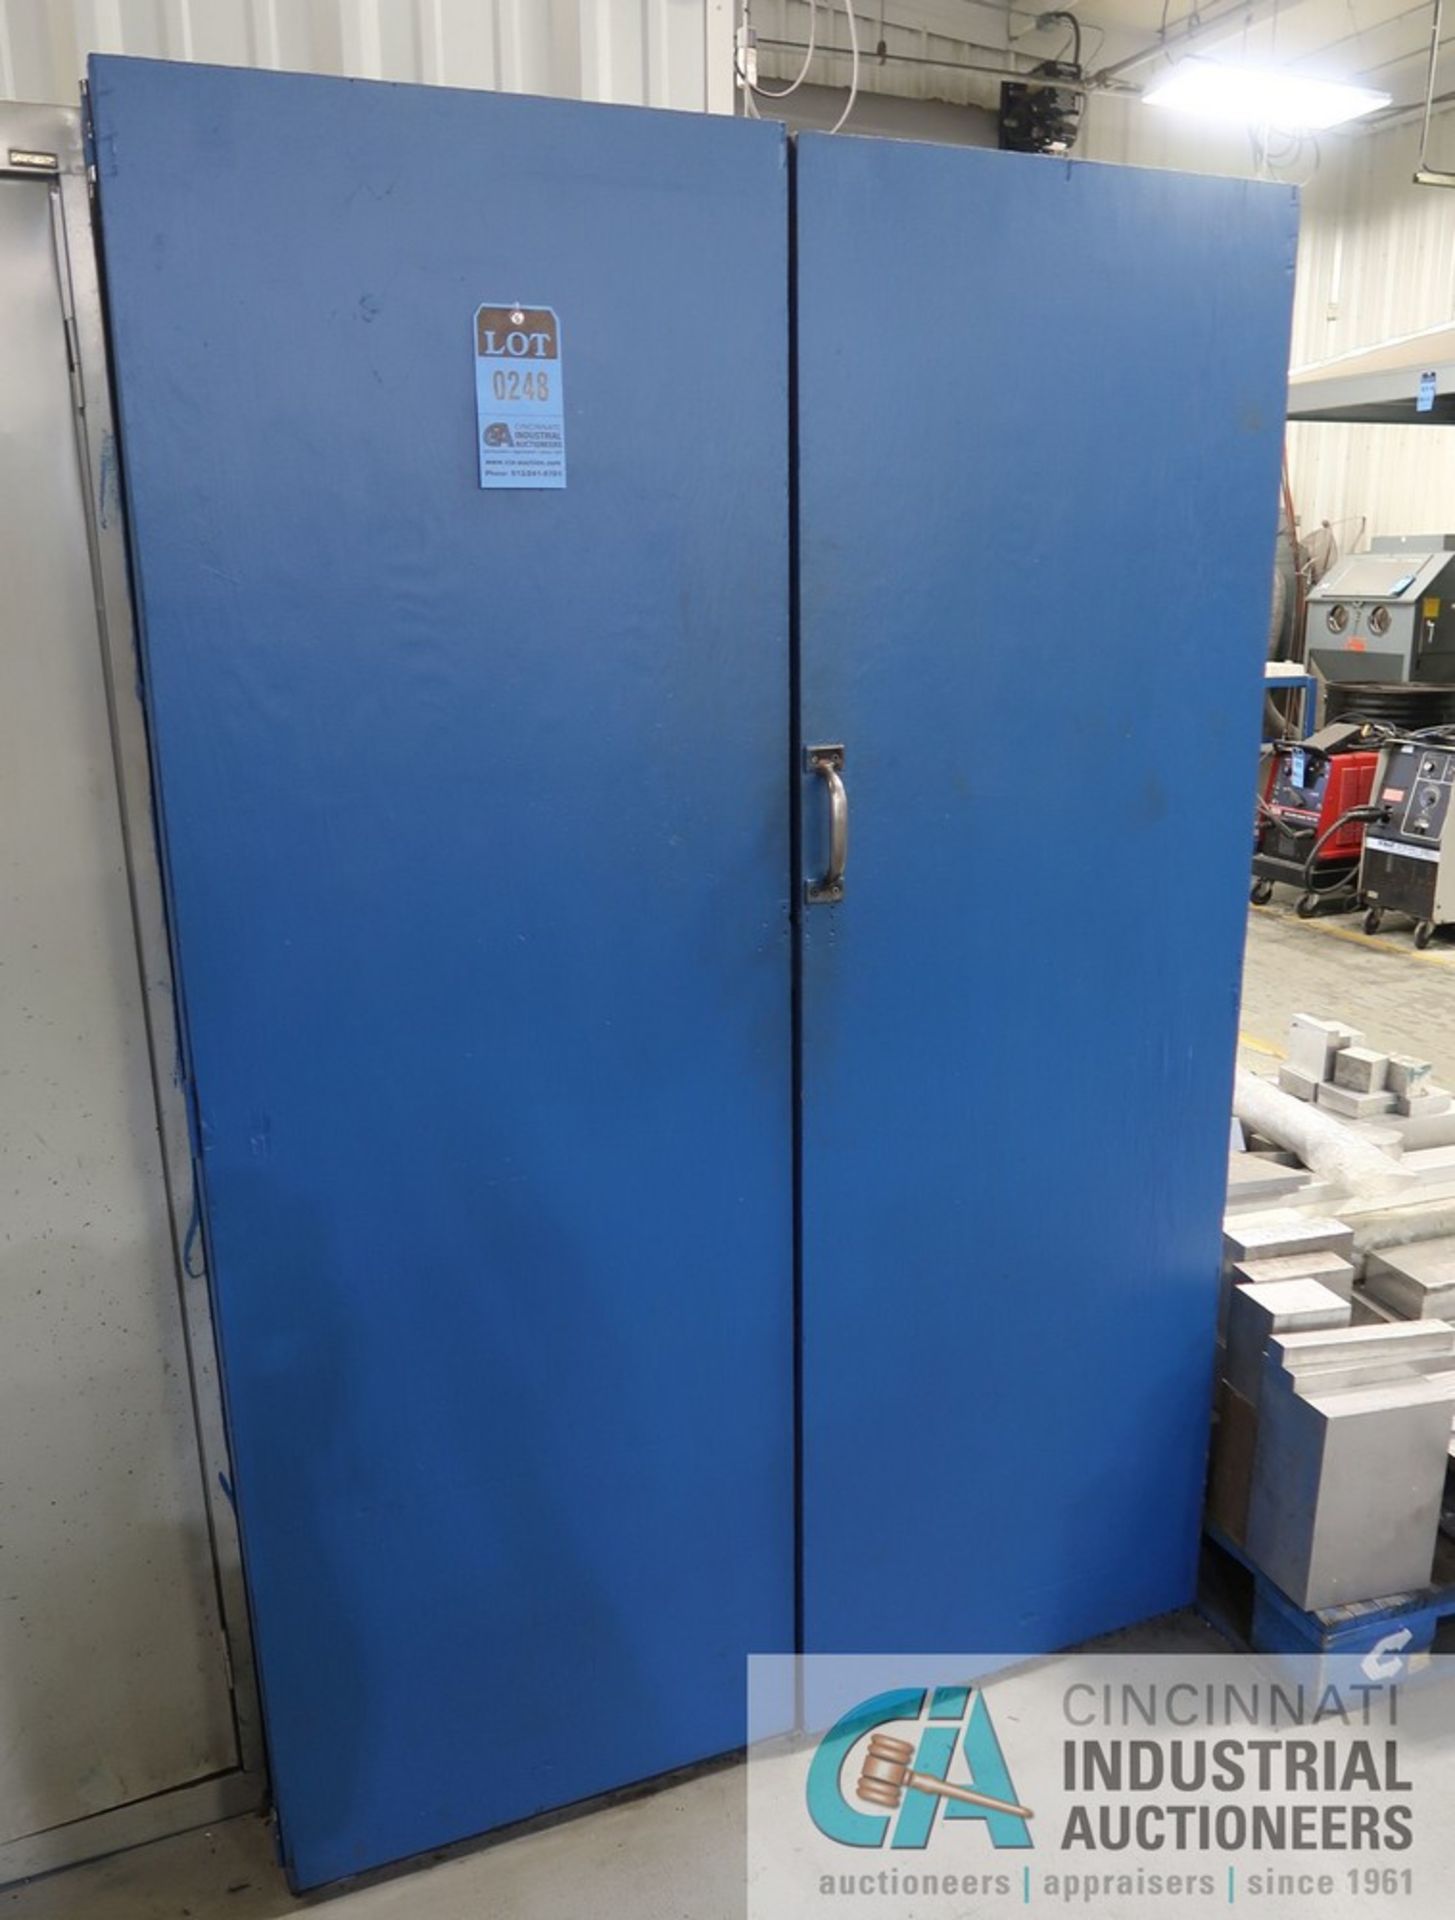 (LOT) MISCELLANEOUS COLLETS, TOOLING, FIXTURES AND OTHER RELATED ITEMS WITH TWO-DOOR CABINET